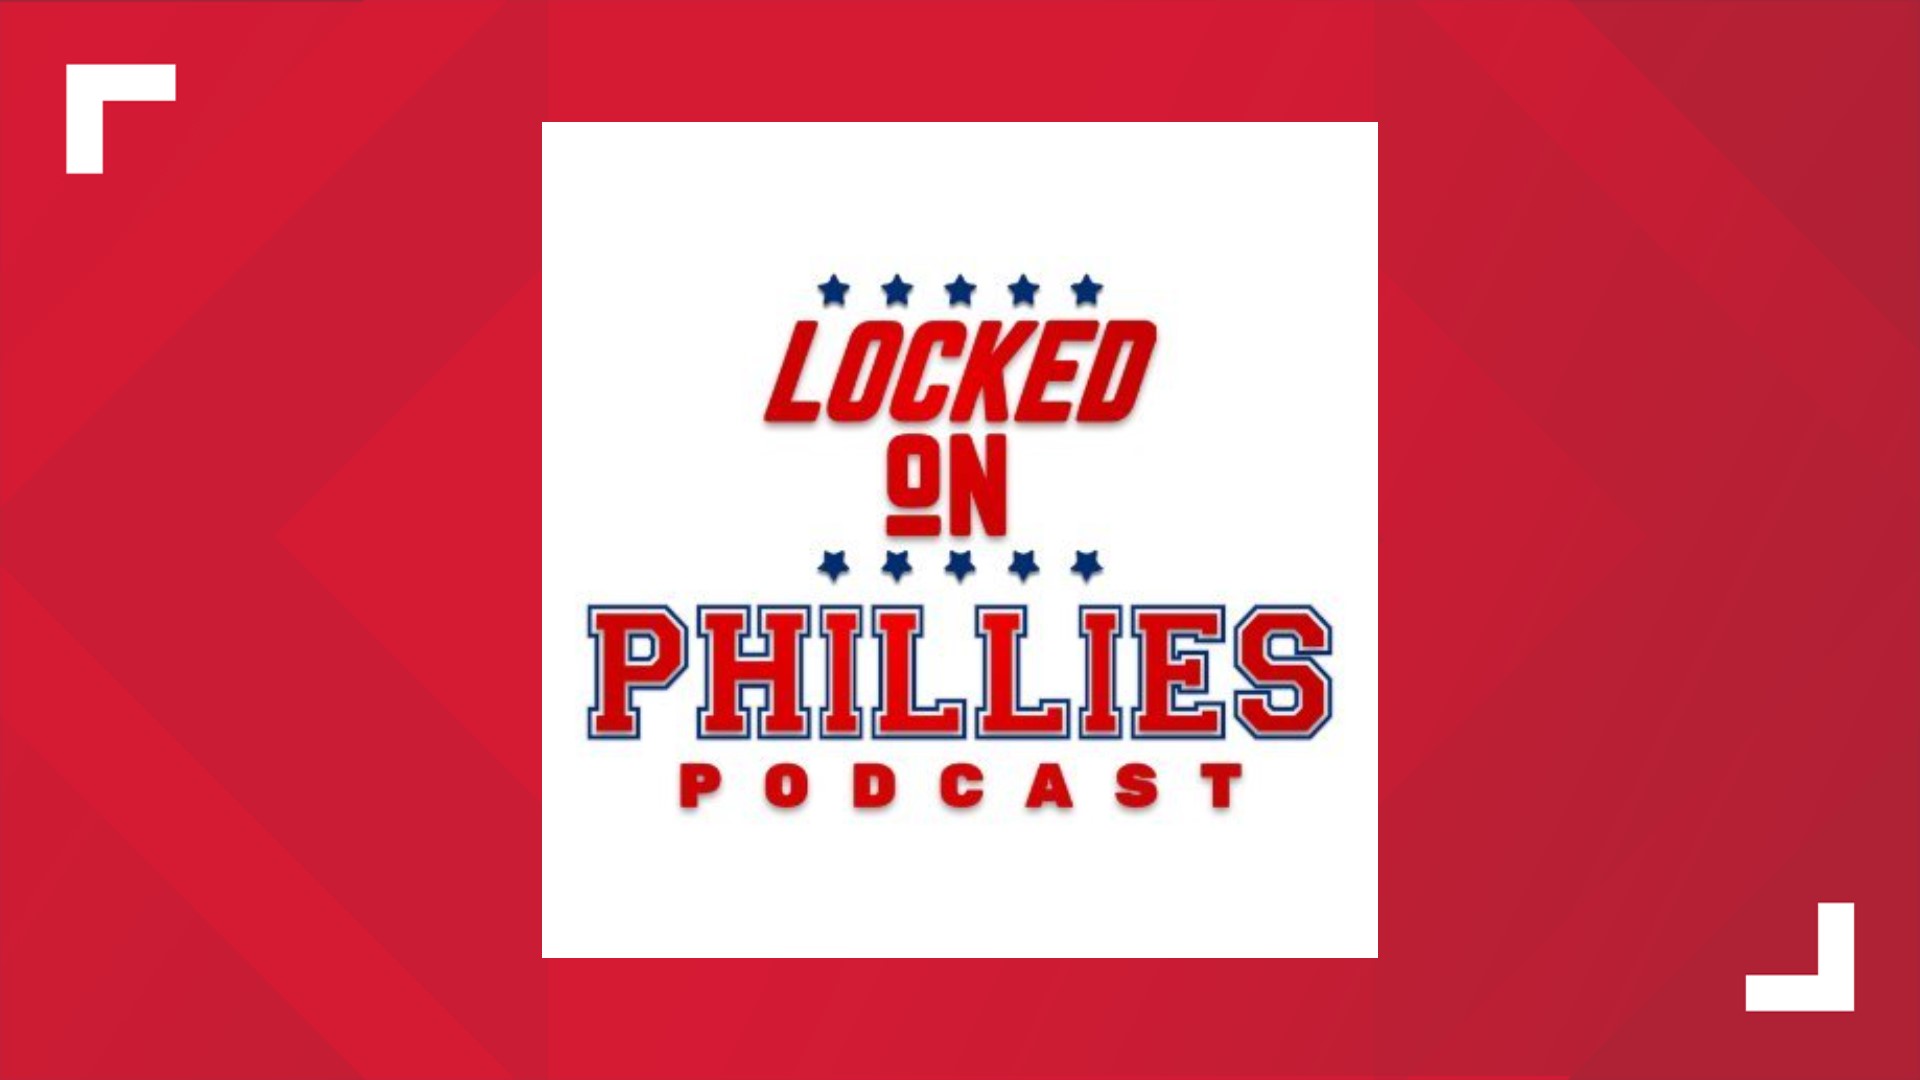 Locked On Phillies host Dan Wilson broke down why the team is struggling to start the season, and what the outlook is for the rest of the season.